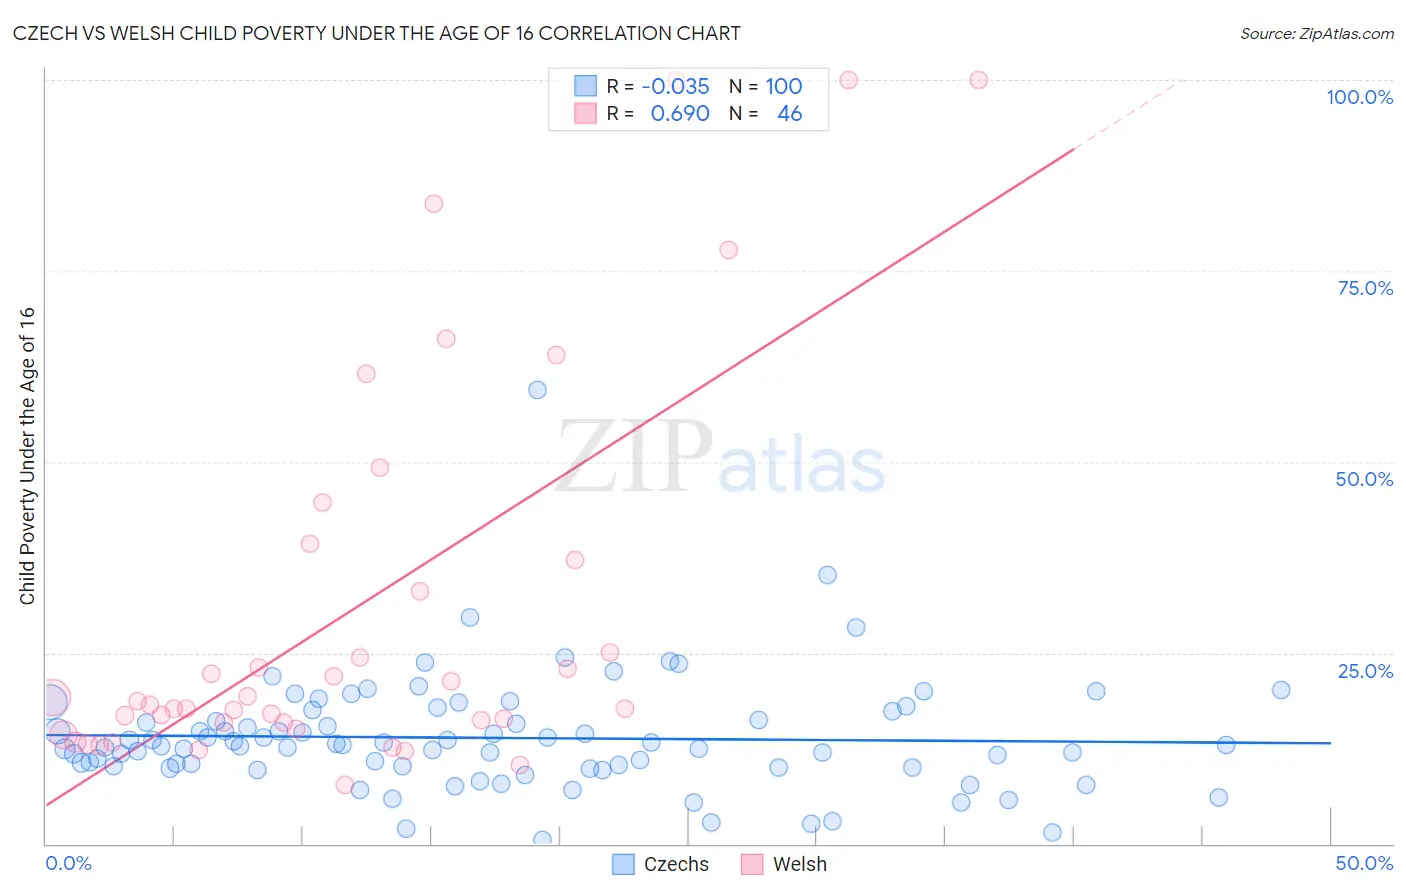 Czech vs Welsh Child Poverty Under the Age of 16